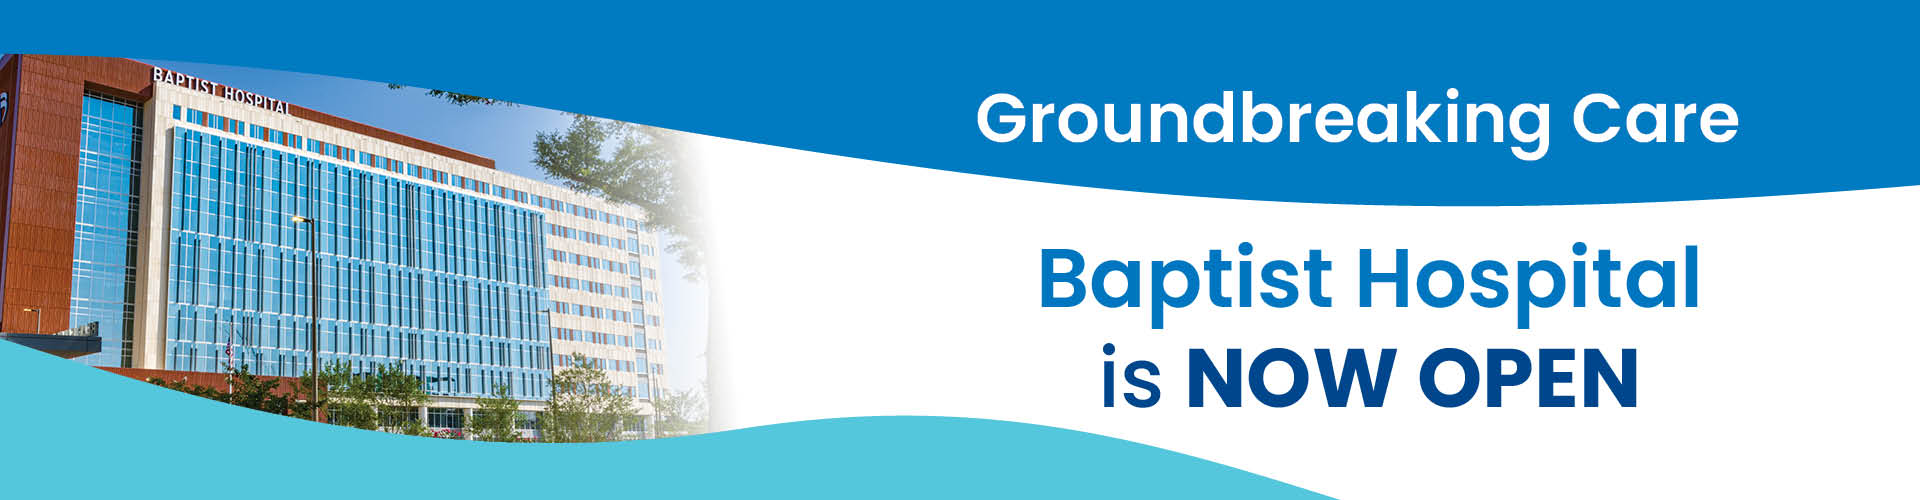 New Baptist Hospital picture with Groundbreaking care Baptist Hospital is now open text